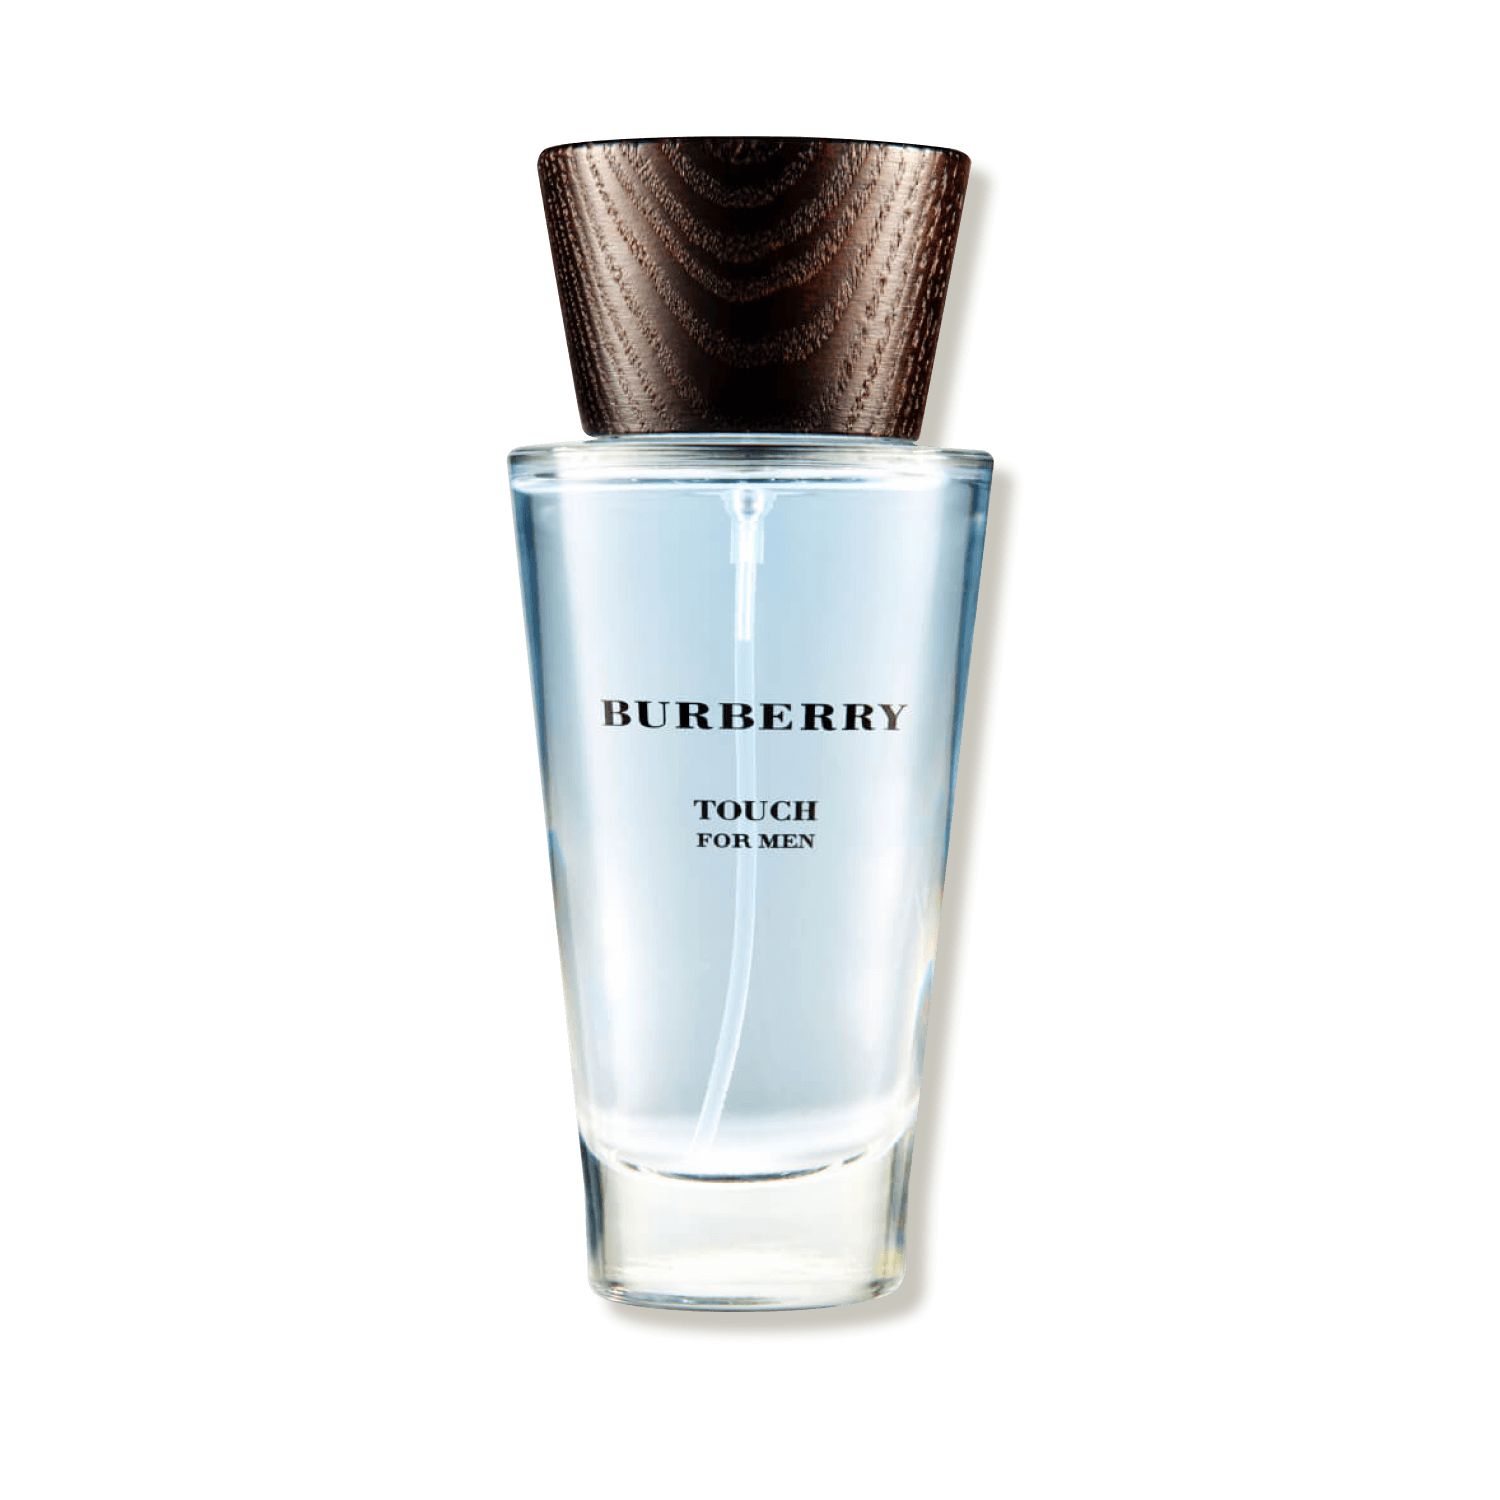 Buy BURBERRY Scentbird at for Burberry for Touch Men